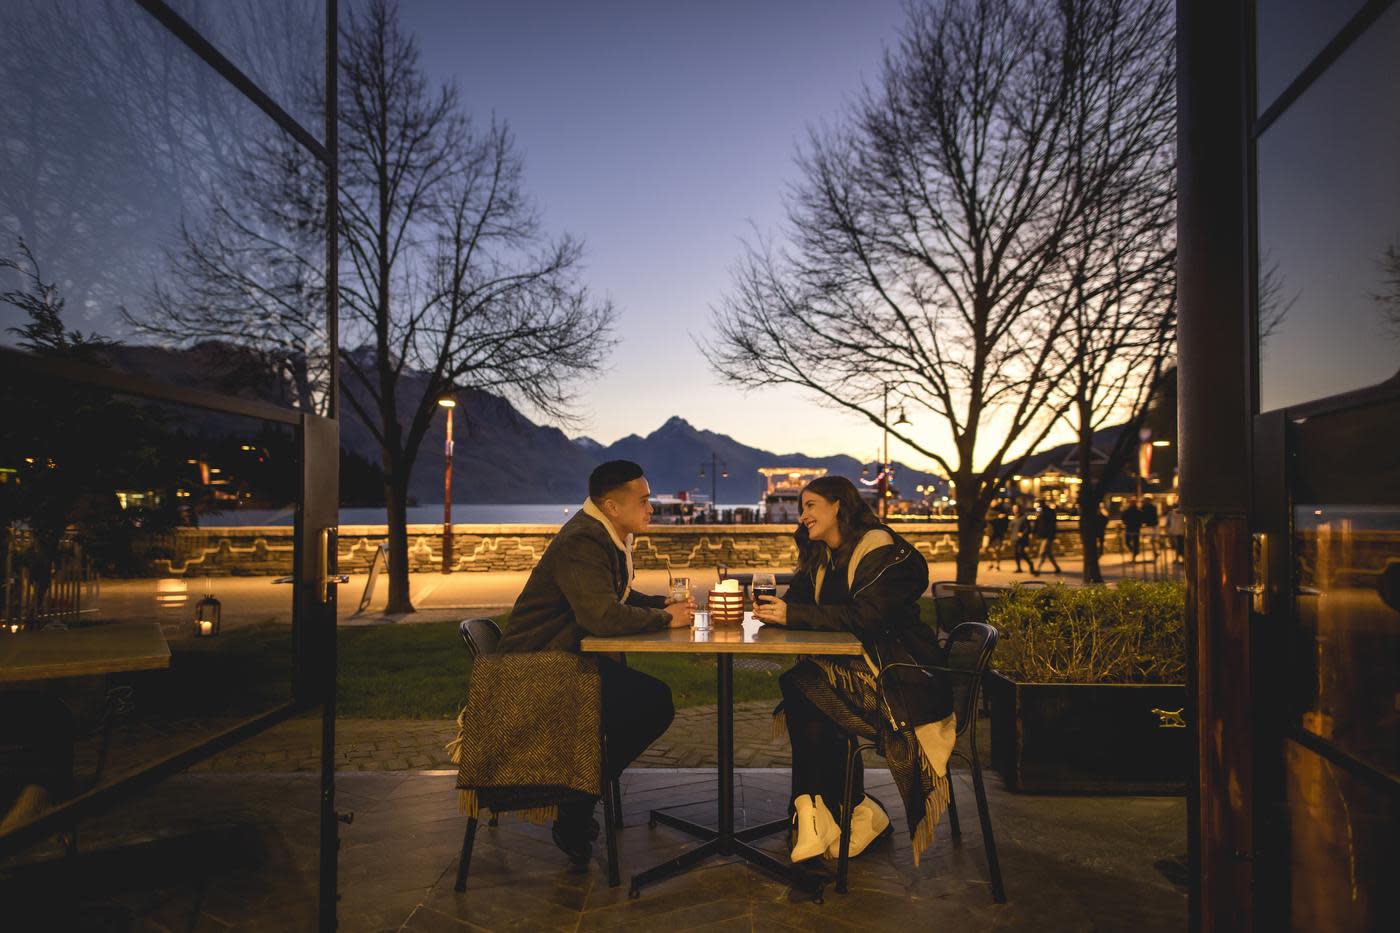 Couple sitting outside The Lodge Bar enjoying a drink on a winter event at sunset